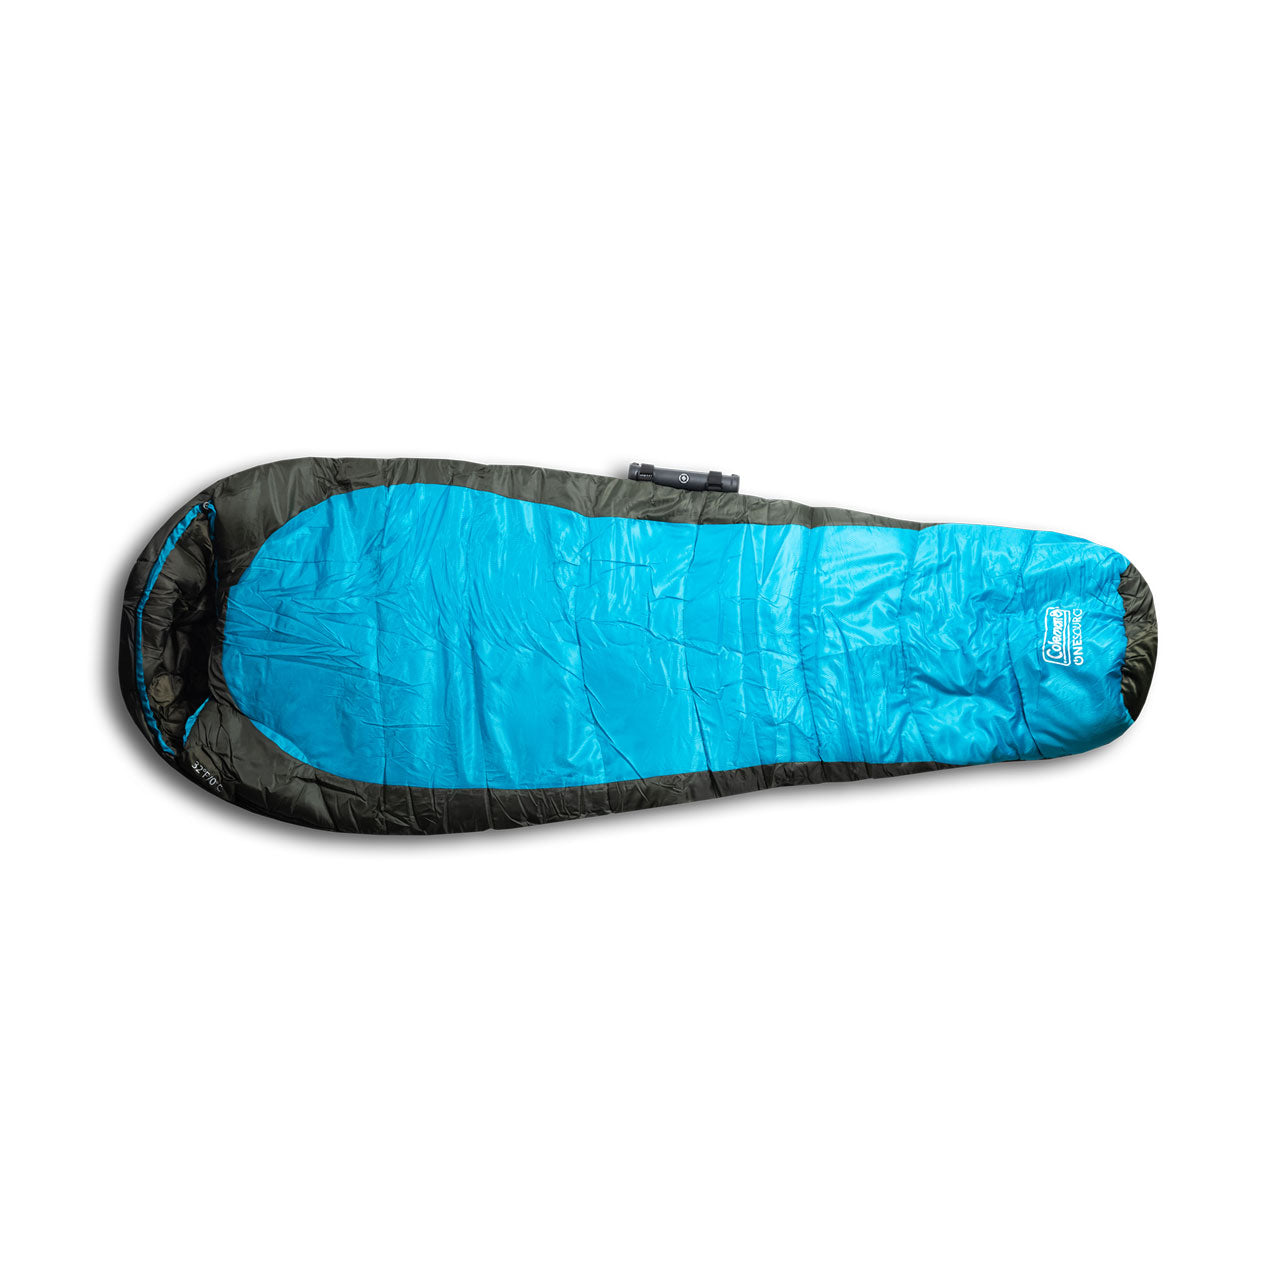 https://cdn.shopify.com/s/files/1/0248/6216/products/coleman-onesource-heated-sleeping-bag-4.jpg?v=1629300201